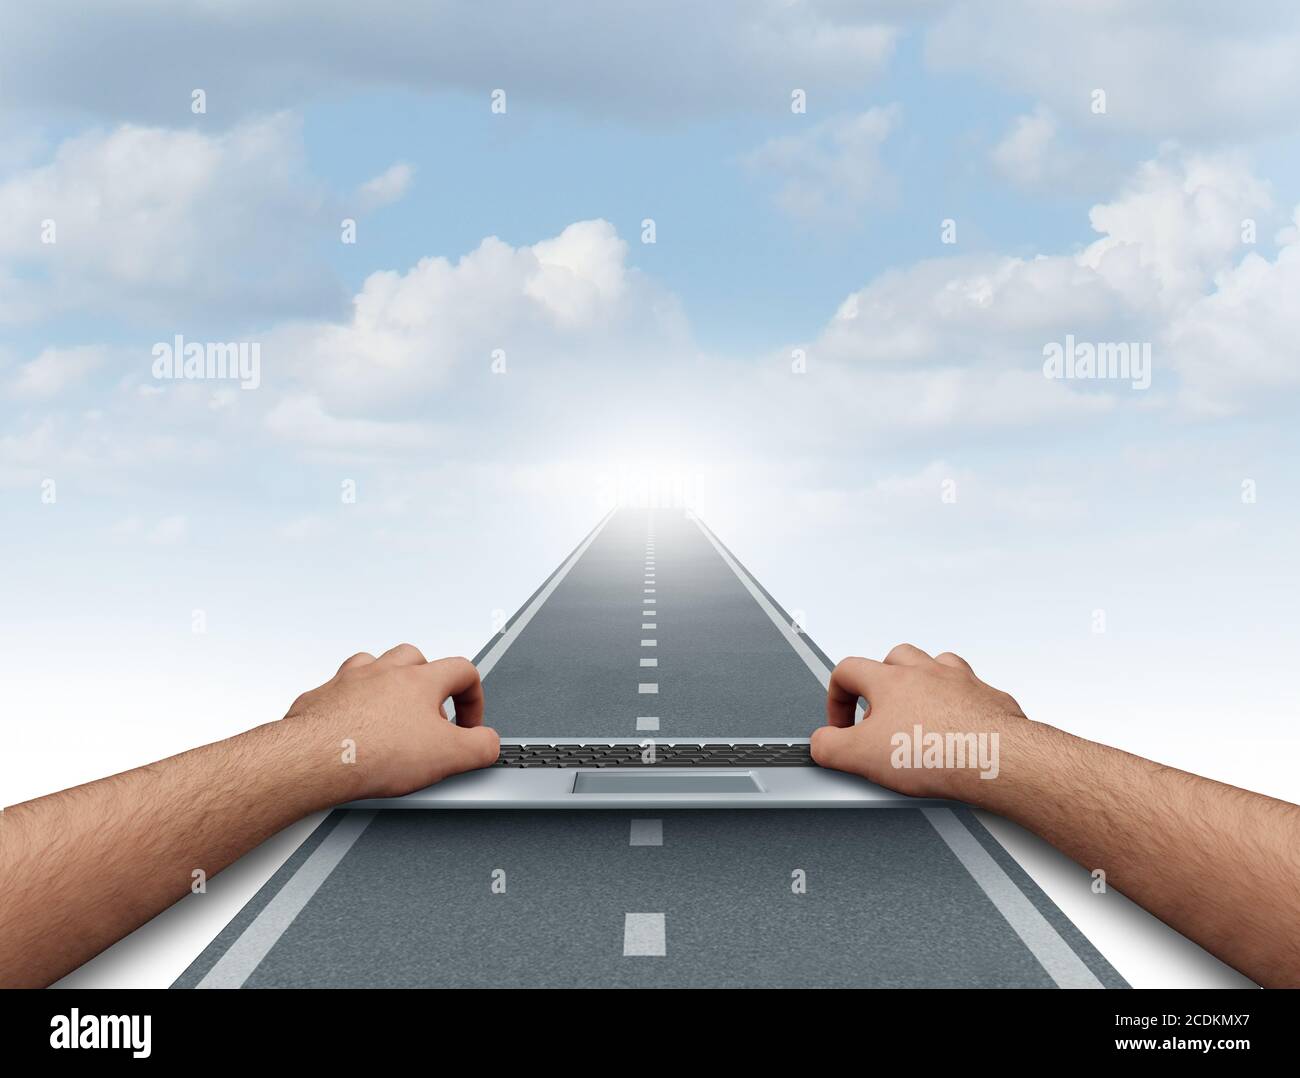 Technology Road and information highway as an internet knowledge access concept with 3D illustration elements. Stock Photo